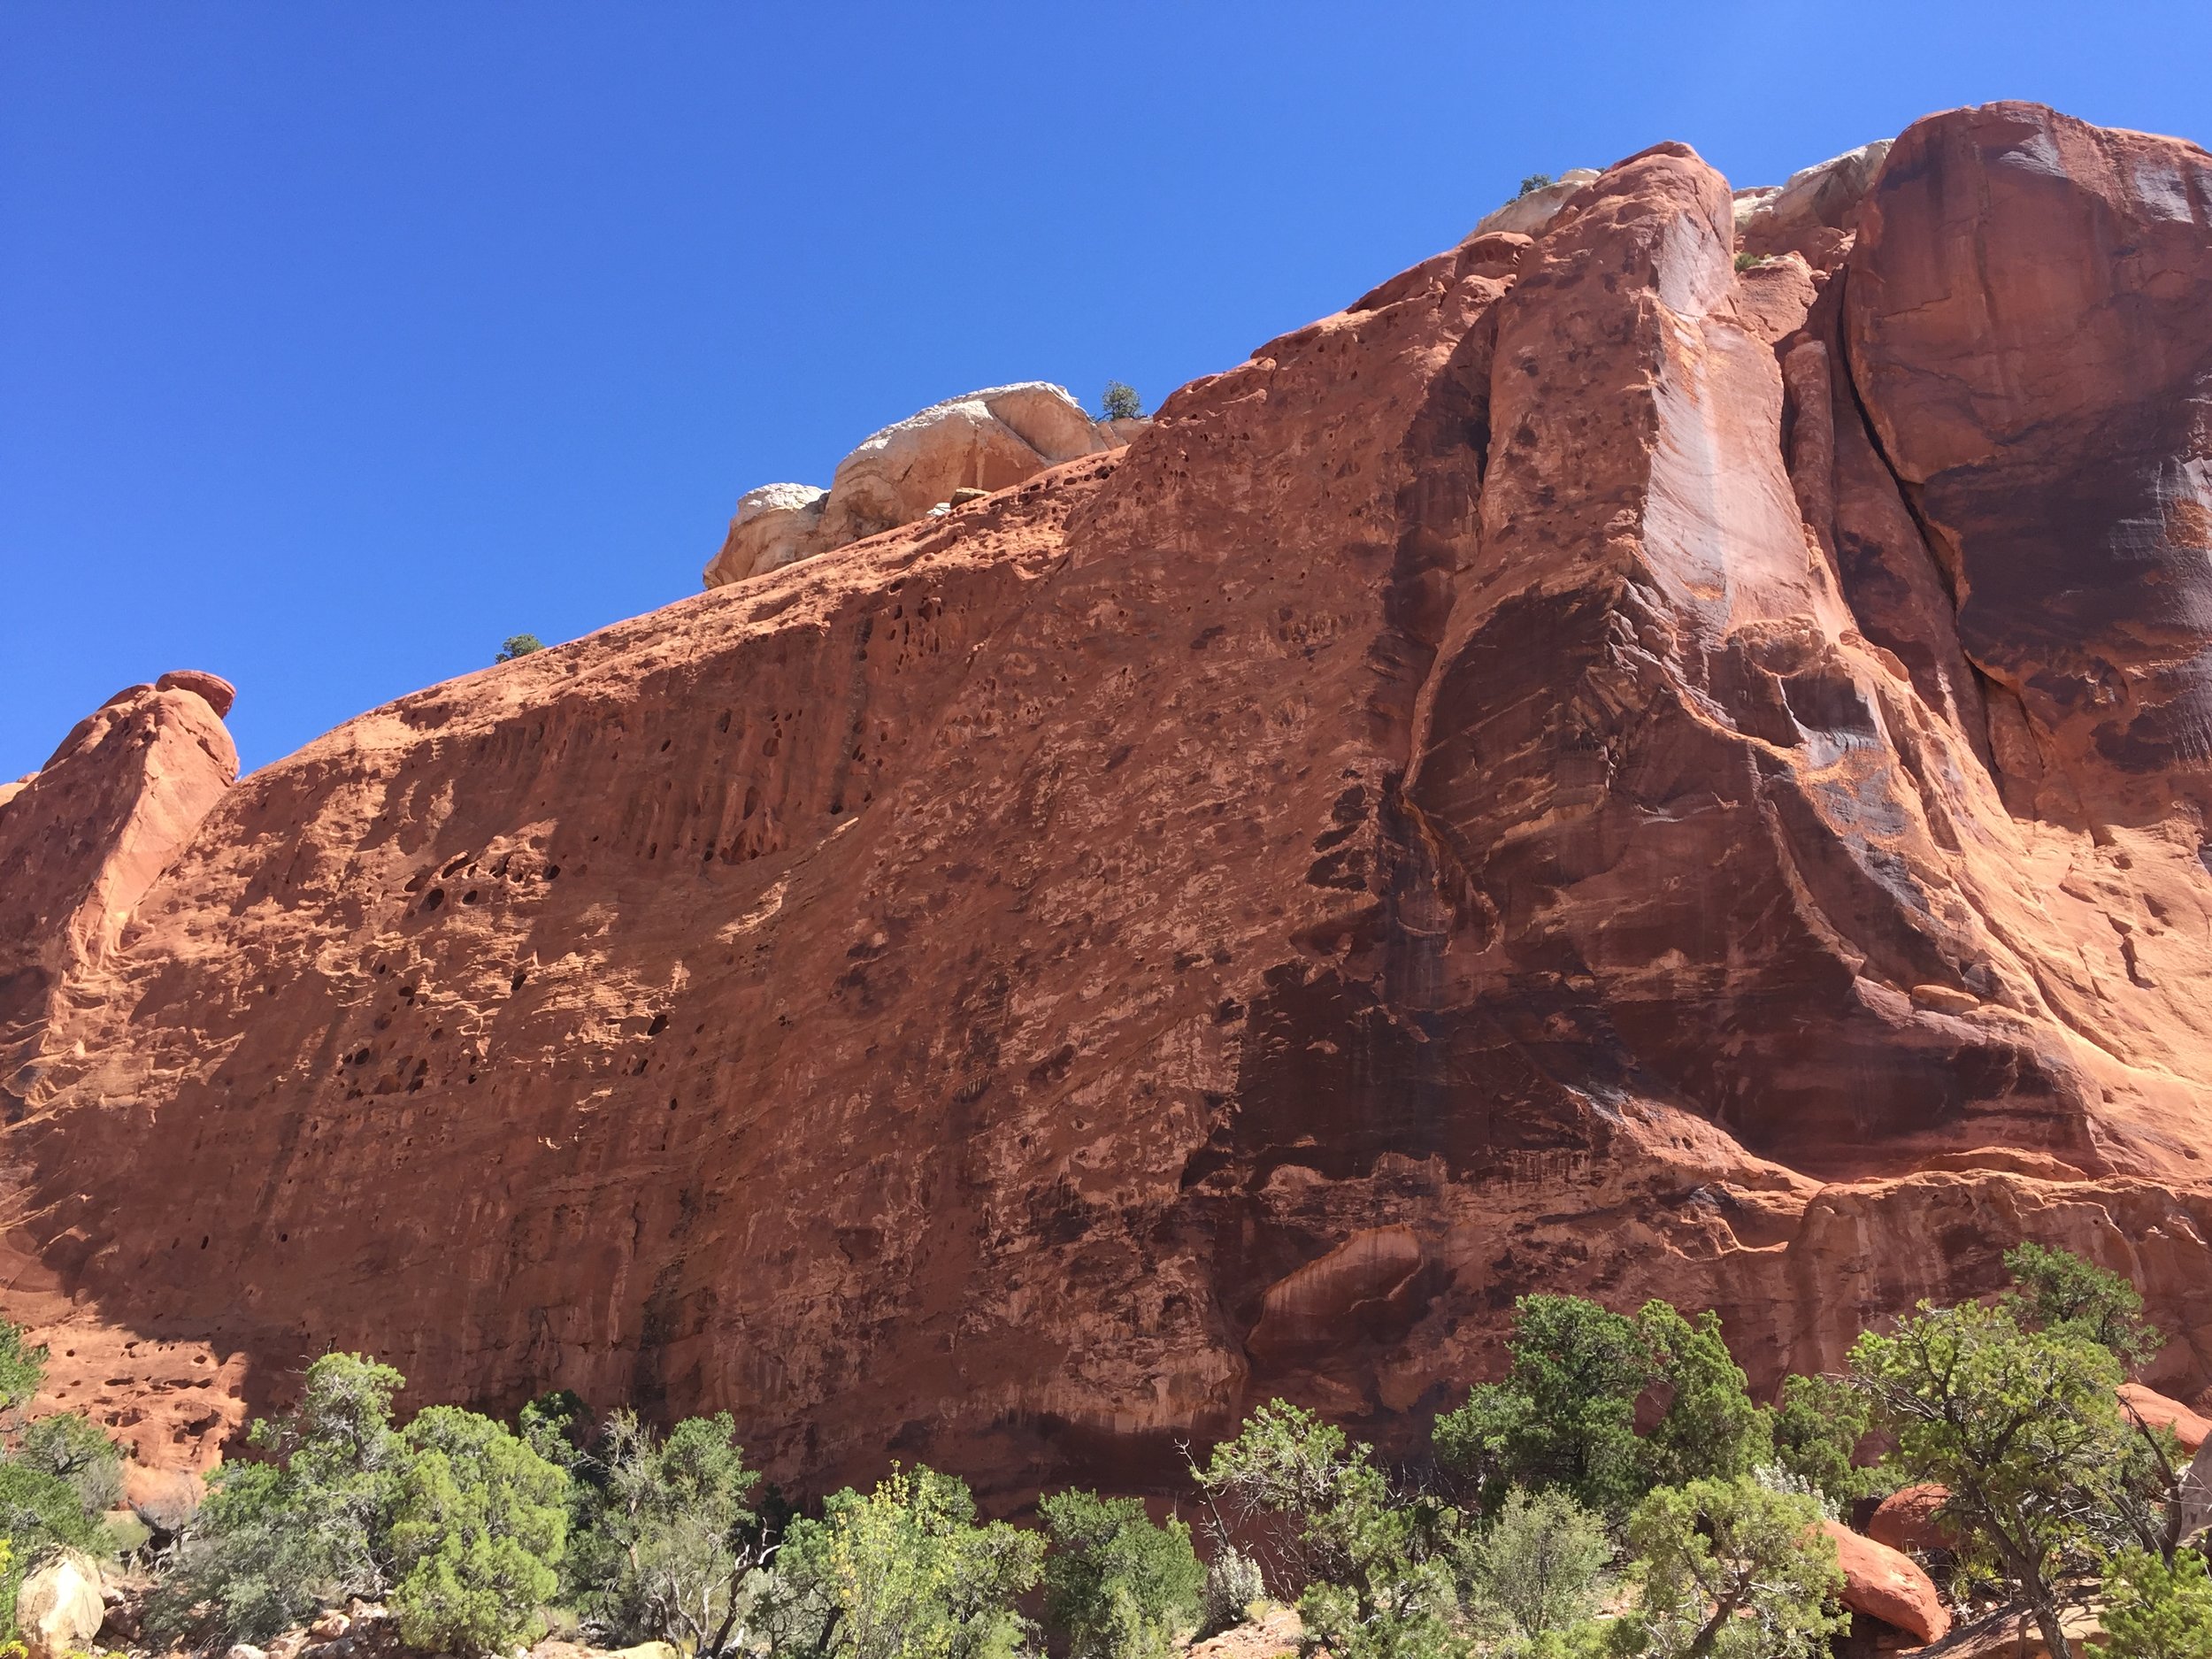   AUGUST, 2017 – CAPITOL REEF NATIONAL PARK: Pictured: one of the massive Wyngate Sandstone cliffs which tower over you as you walk. Allow your mind to give into make-believe, and you’ll have no problem imagining yourself on an alien world.  